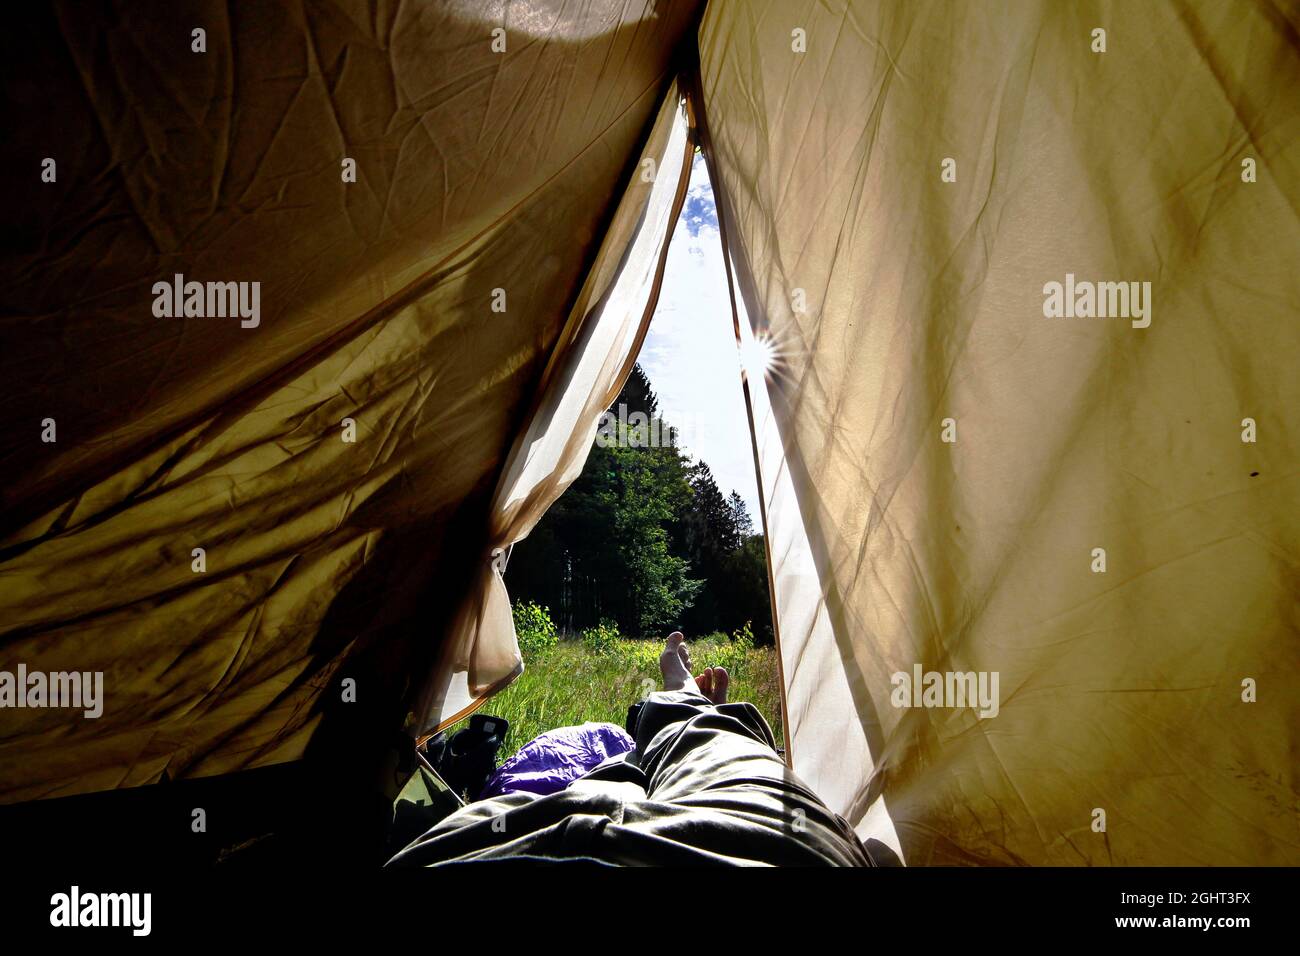 Legs peeping out of tent, hiker camping, column trail, perforated plate trail, hiking trail through forest, Green Belt, border trail, former Stock Photo